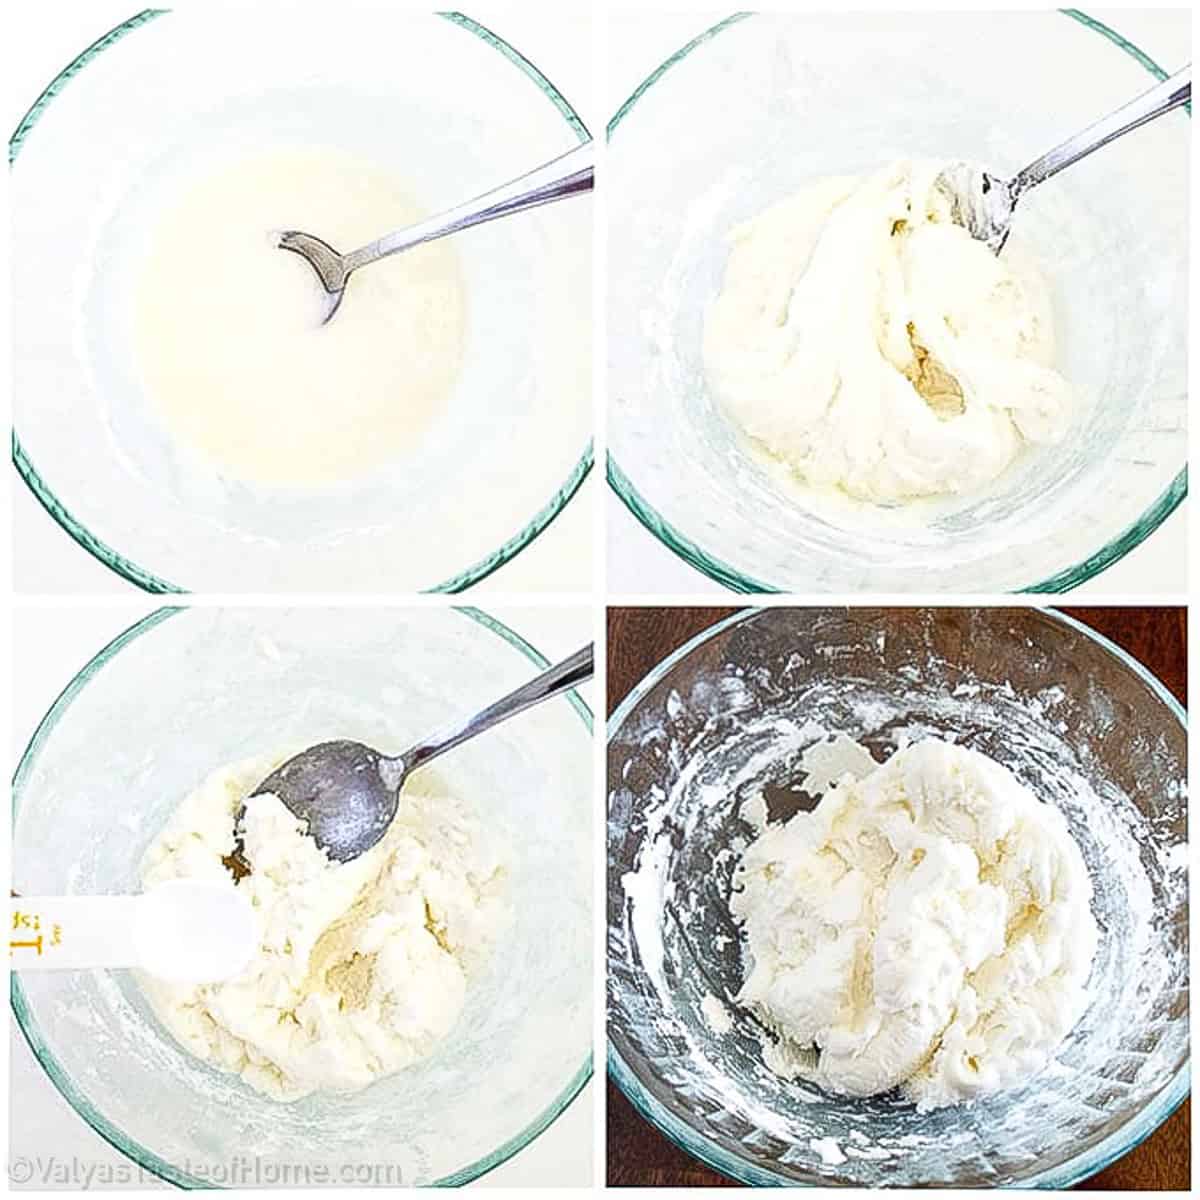 You may need to adjust the amount of powdered sugar using up to a total of 5 cups depending on the size of the egg whites you had.